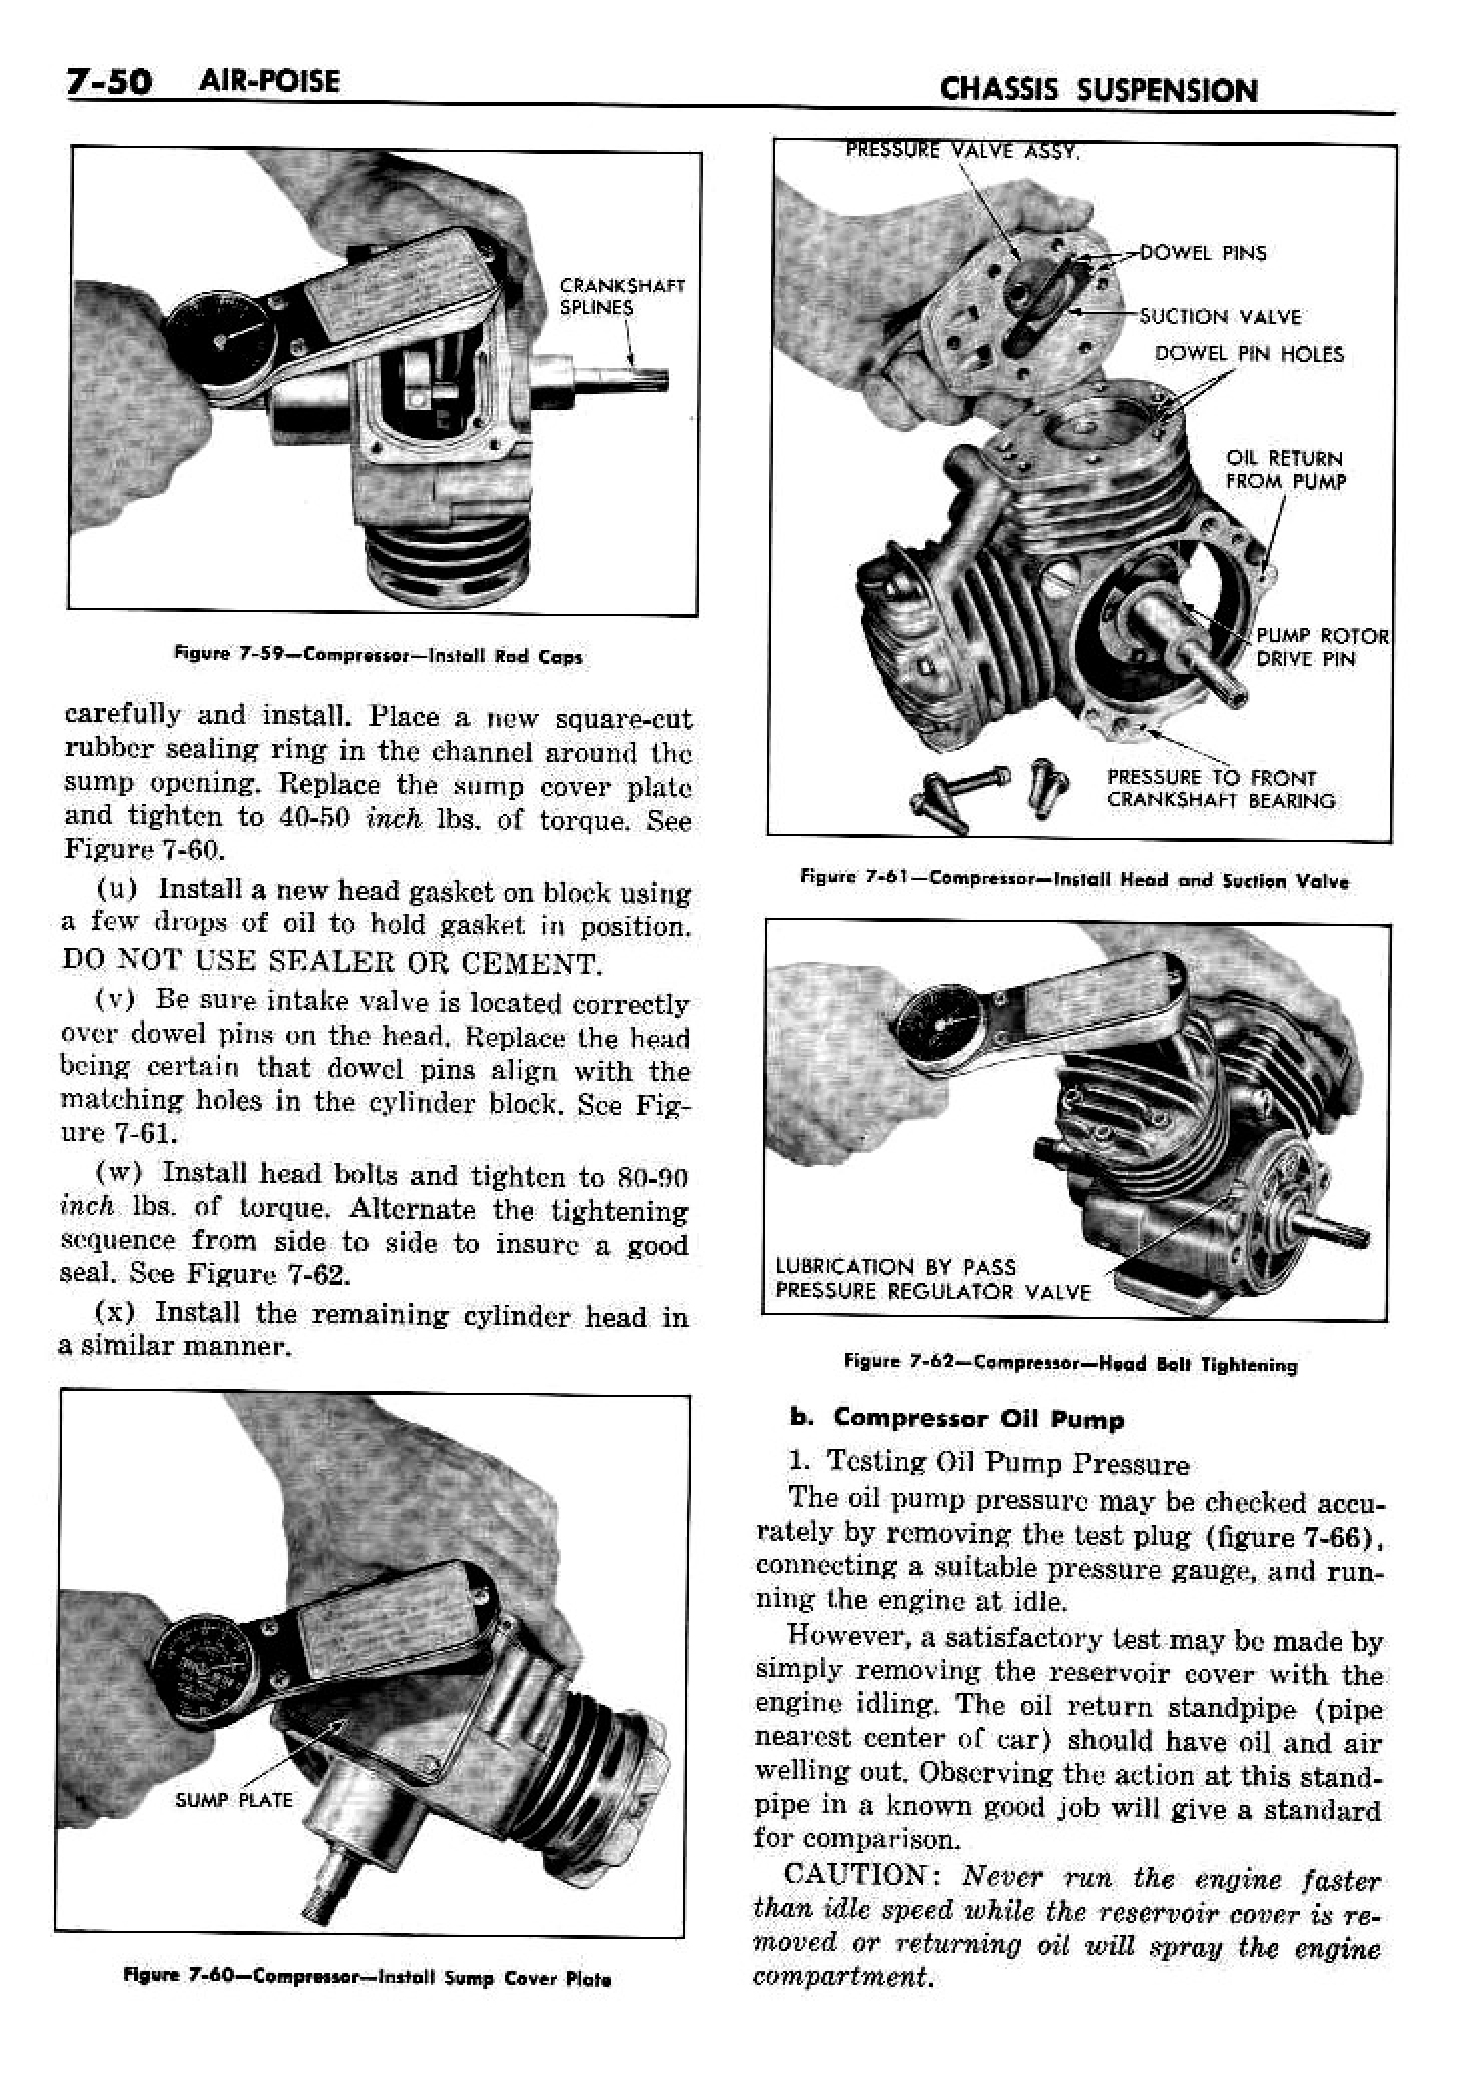 n_08 1958 Buick Shop Manual - Chassis Suspension_50.jpg